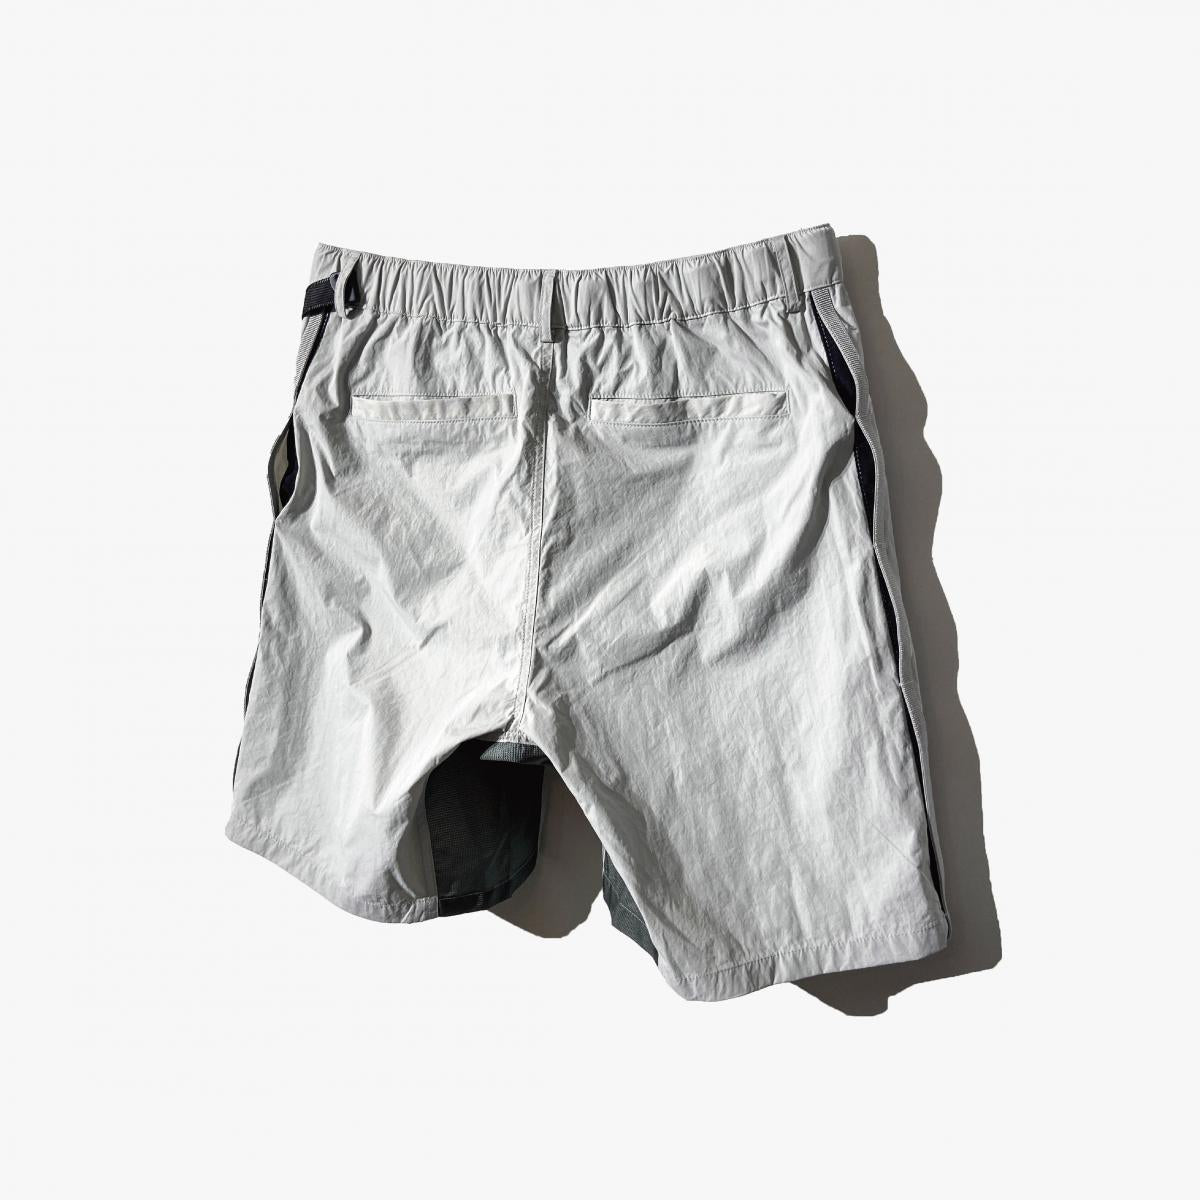 SP13 Wear-resistant breathable shorts (GYL)